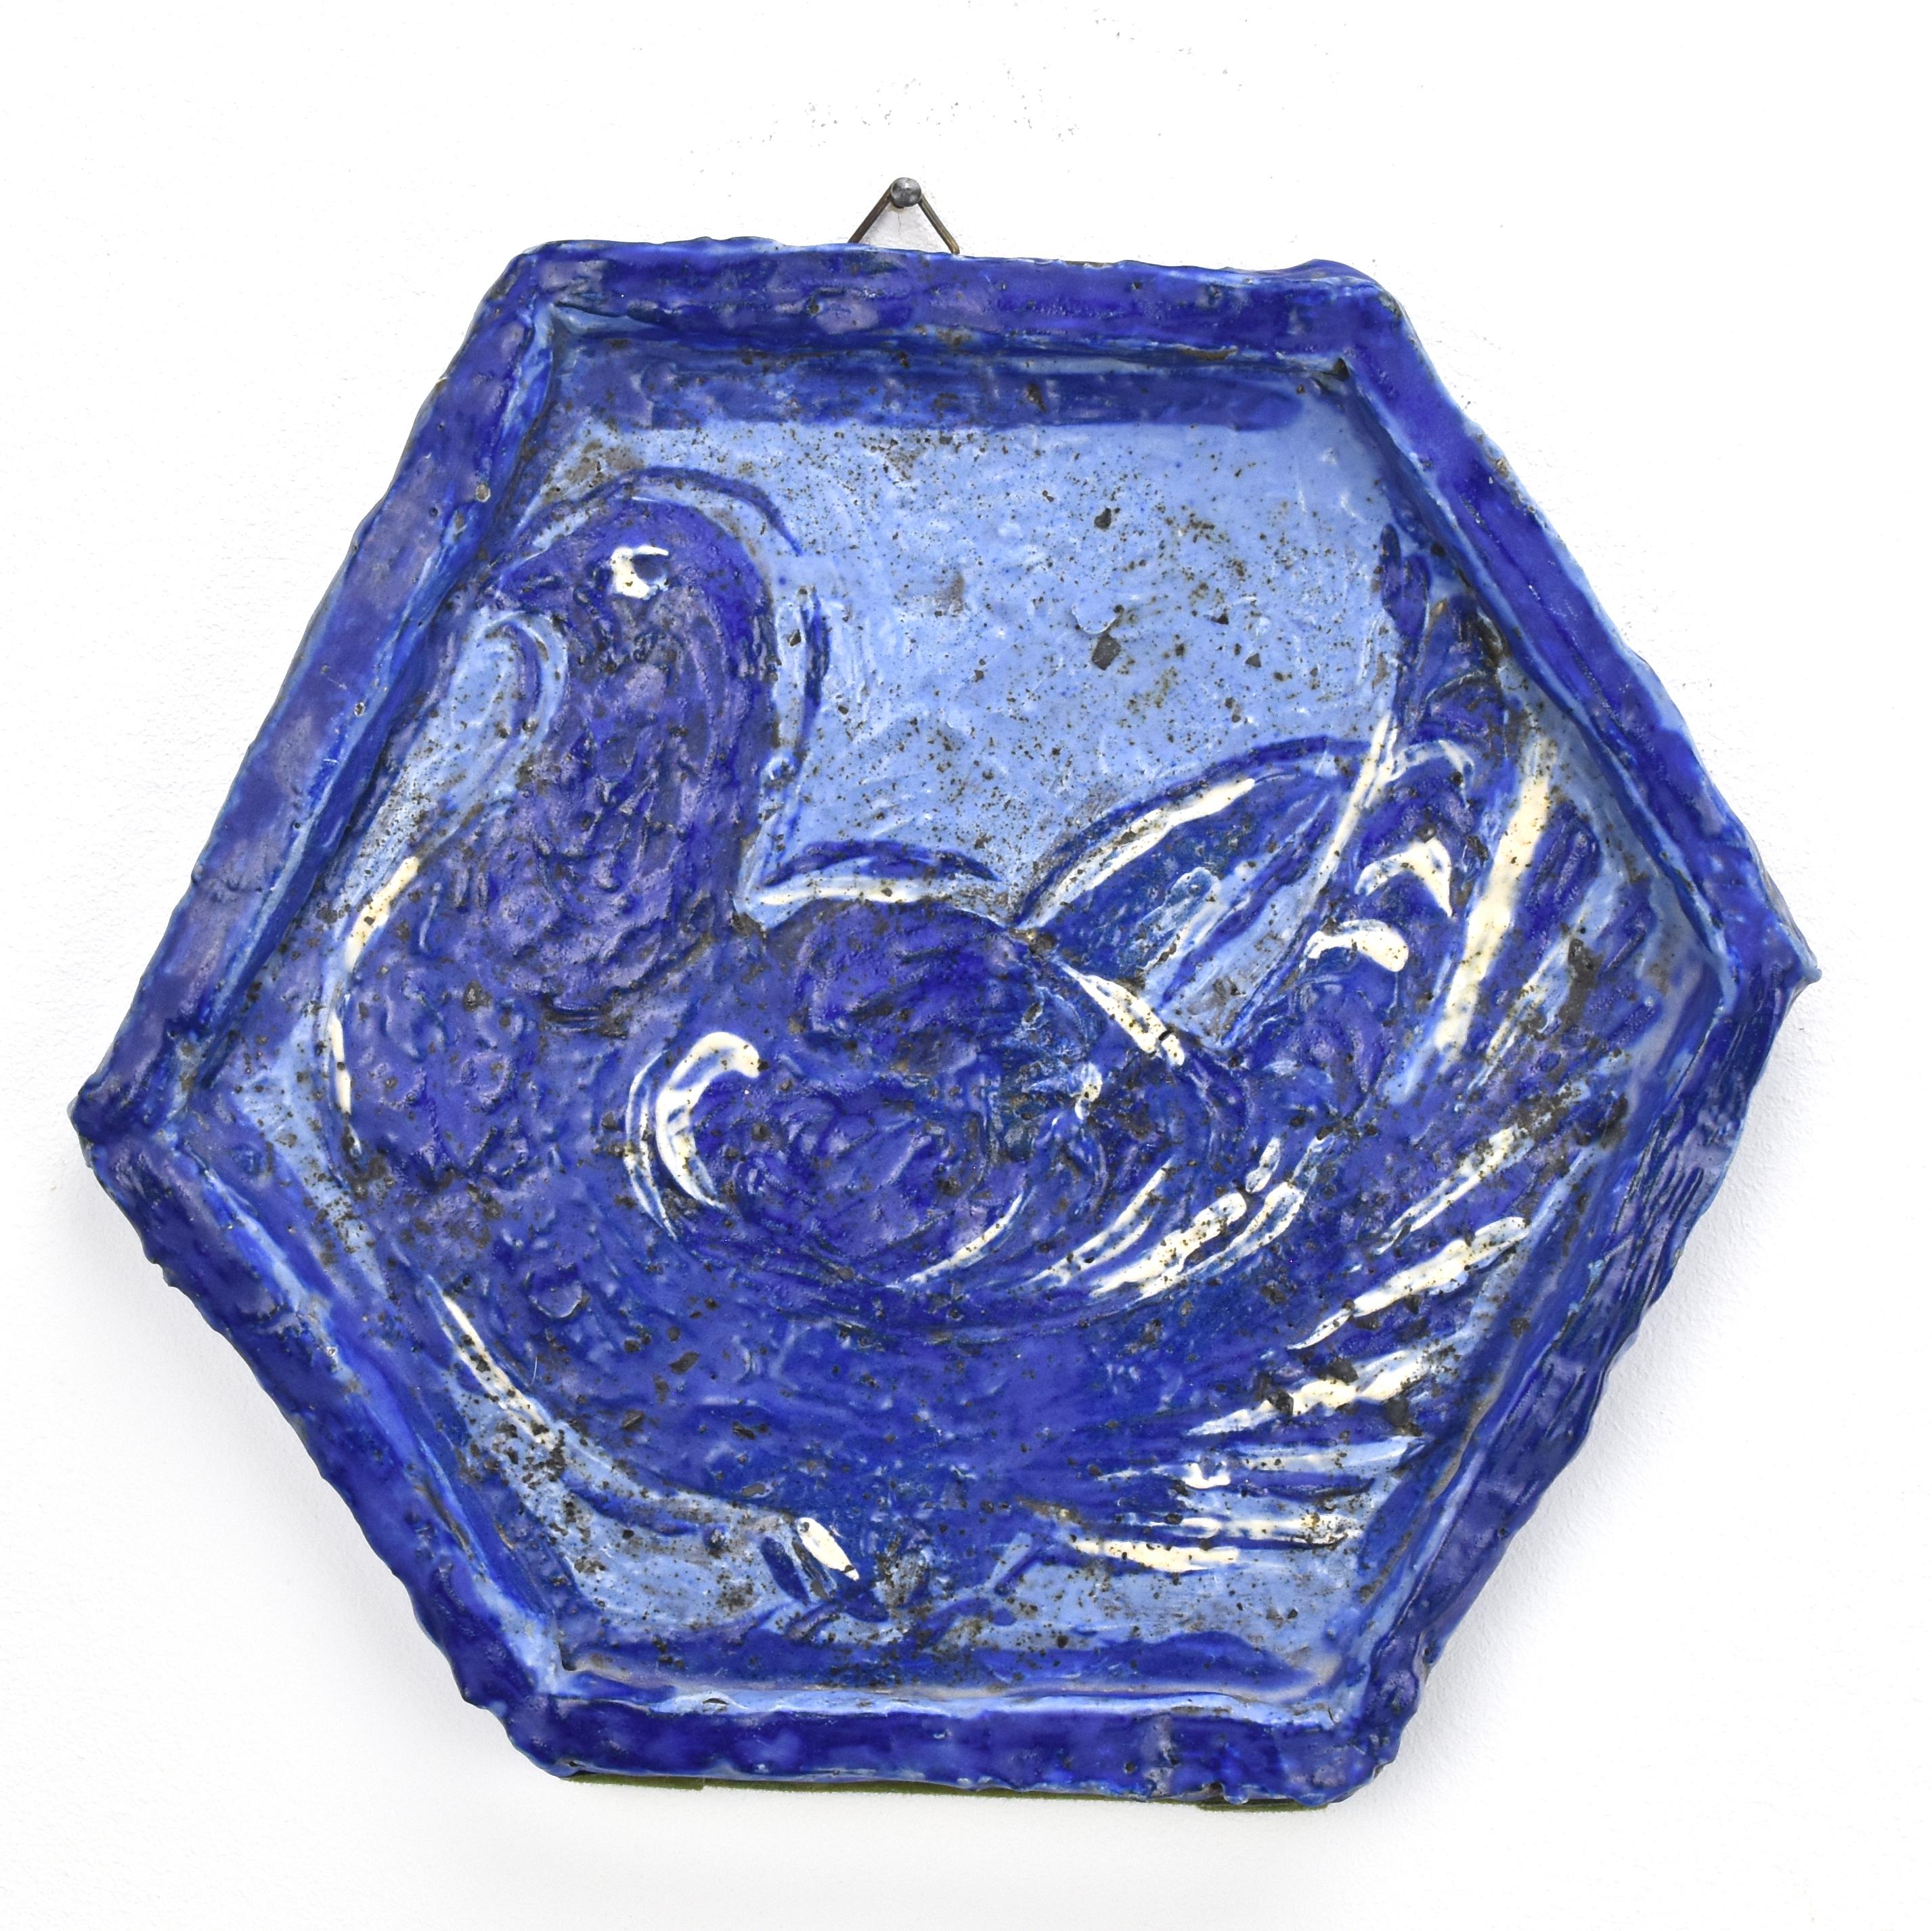 A beautiful hand painted and thickly glazed decorative wall tile by an unknown artist, influenced by the works of Pablo Picasso.

The wall plaque is decorated with a dove in different shades of blue with white accents.

Funny and whimsical, you can